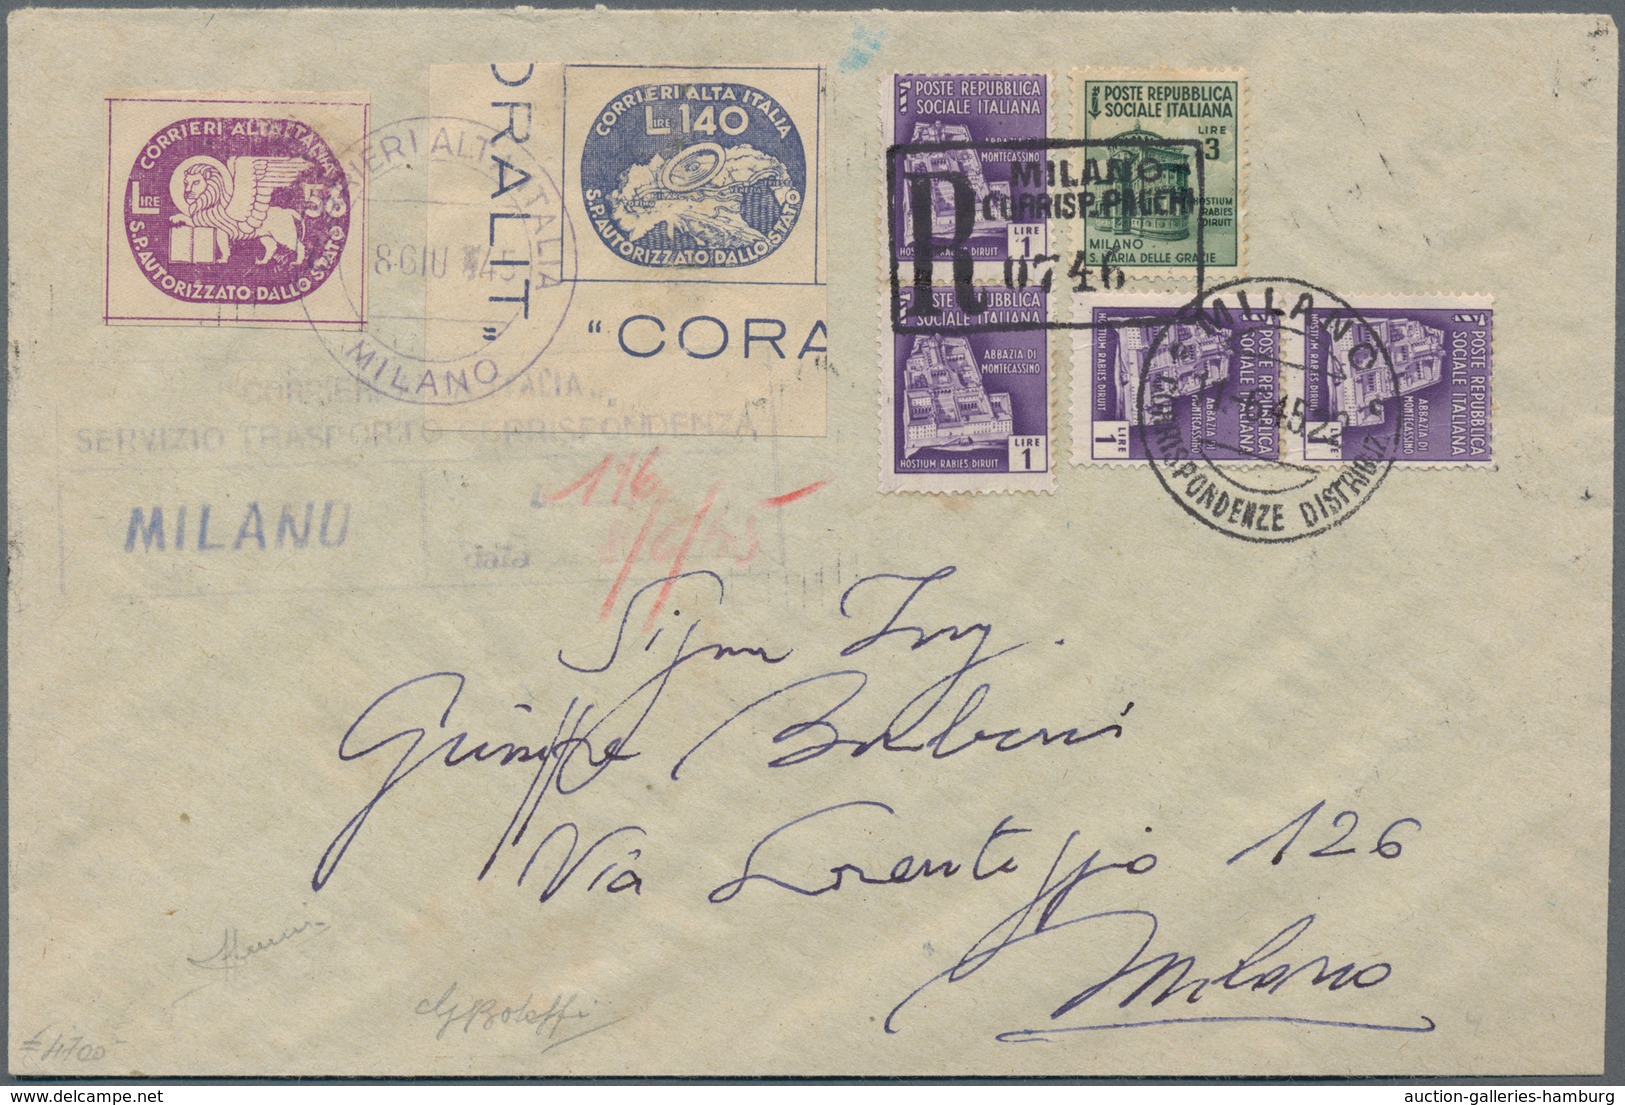 Italien - Lokalausgaben 1944/45 - Coralit (Privatpost): 1945. Registered Letter, Franked With CORALI - Authorized Private Service